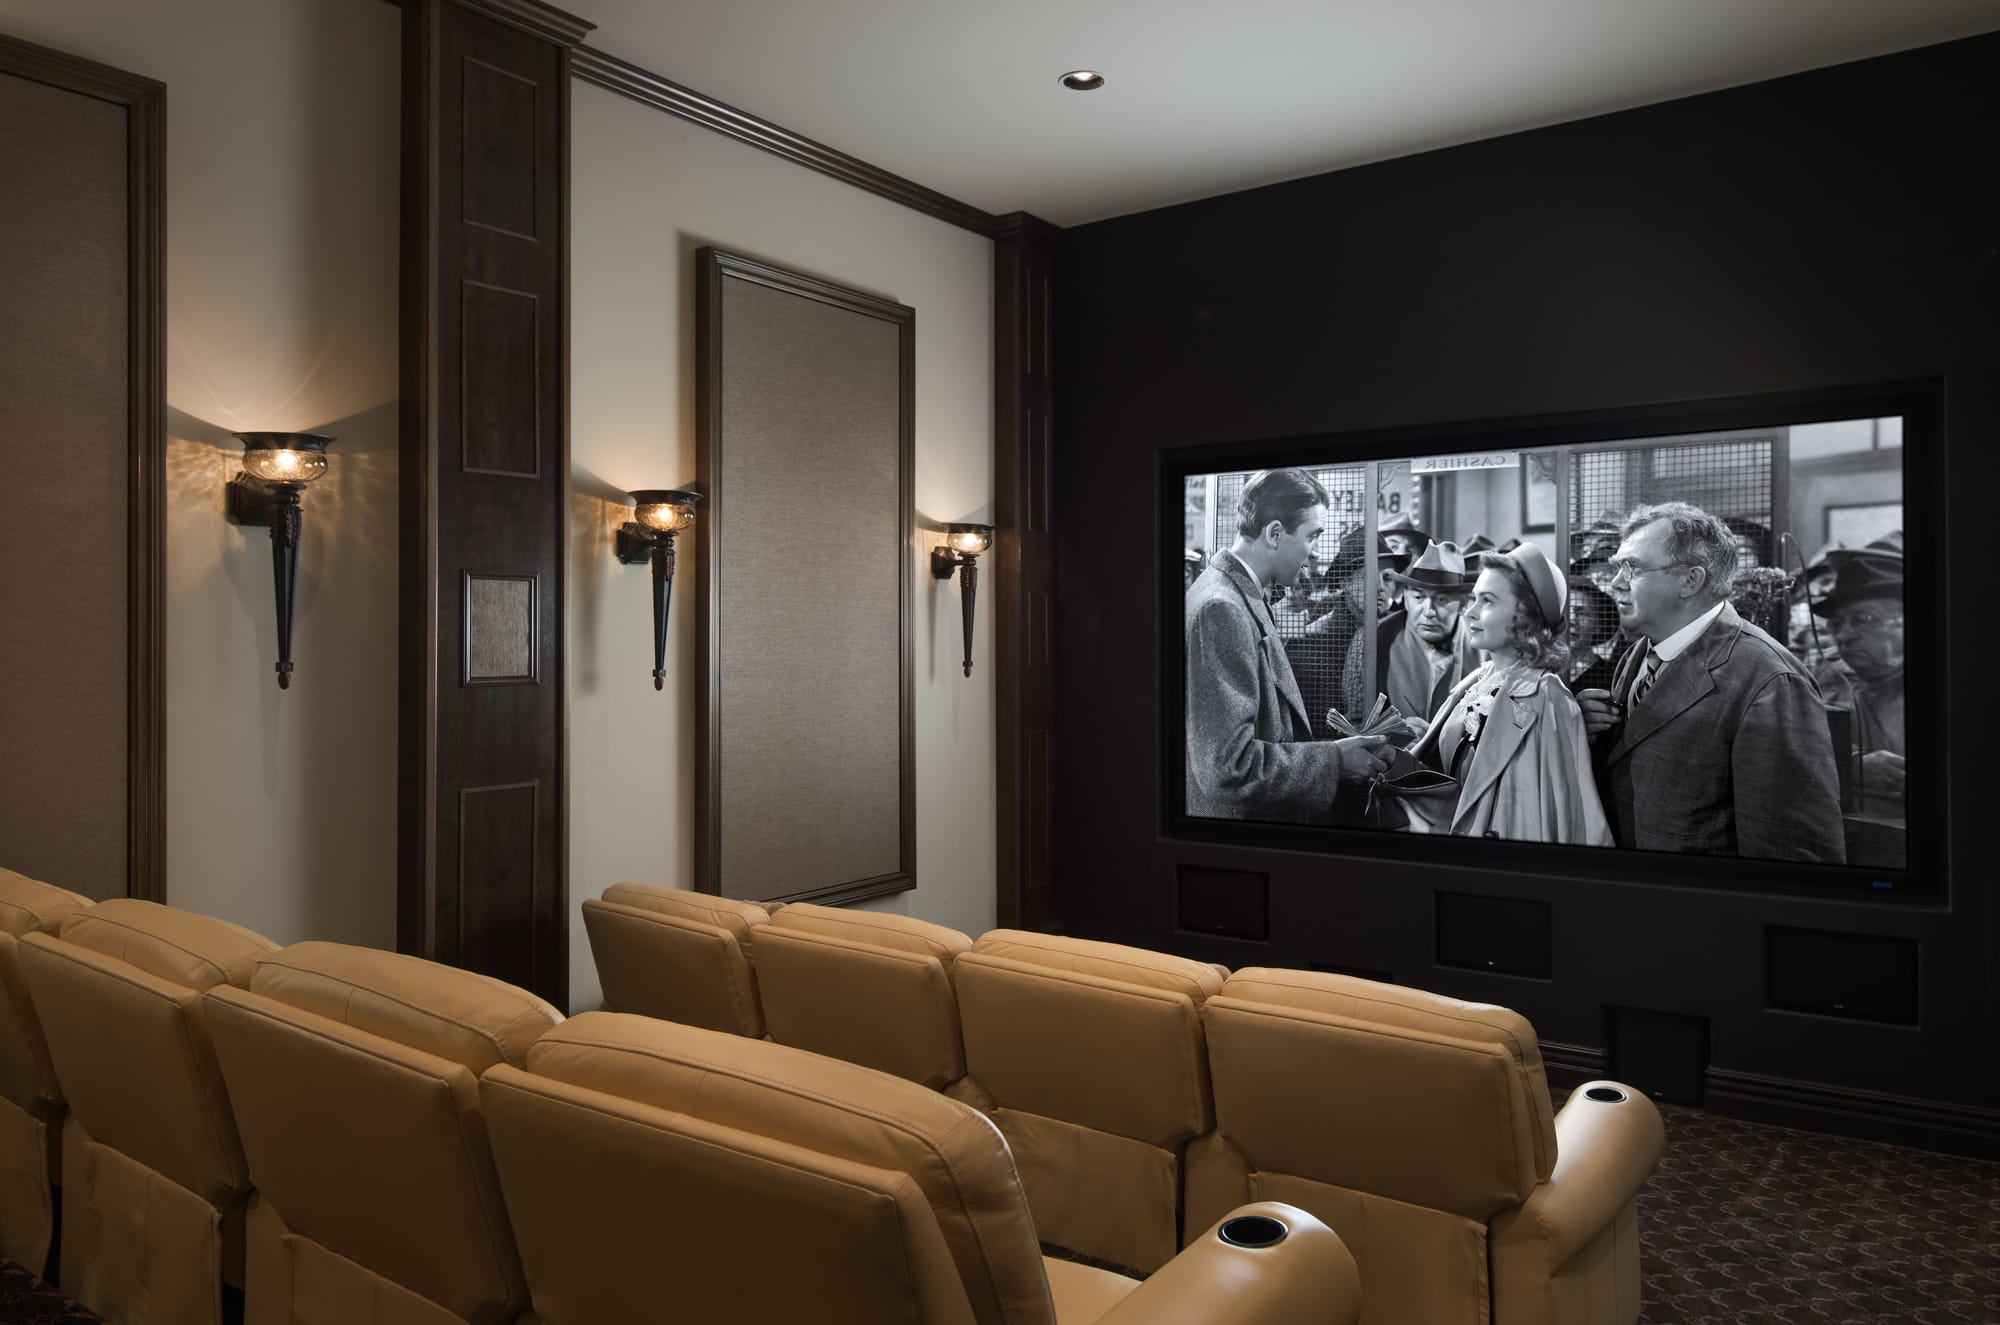 Luxury Home Theater: An Unparalleled Cinema Experience